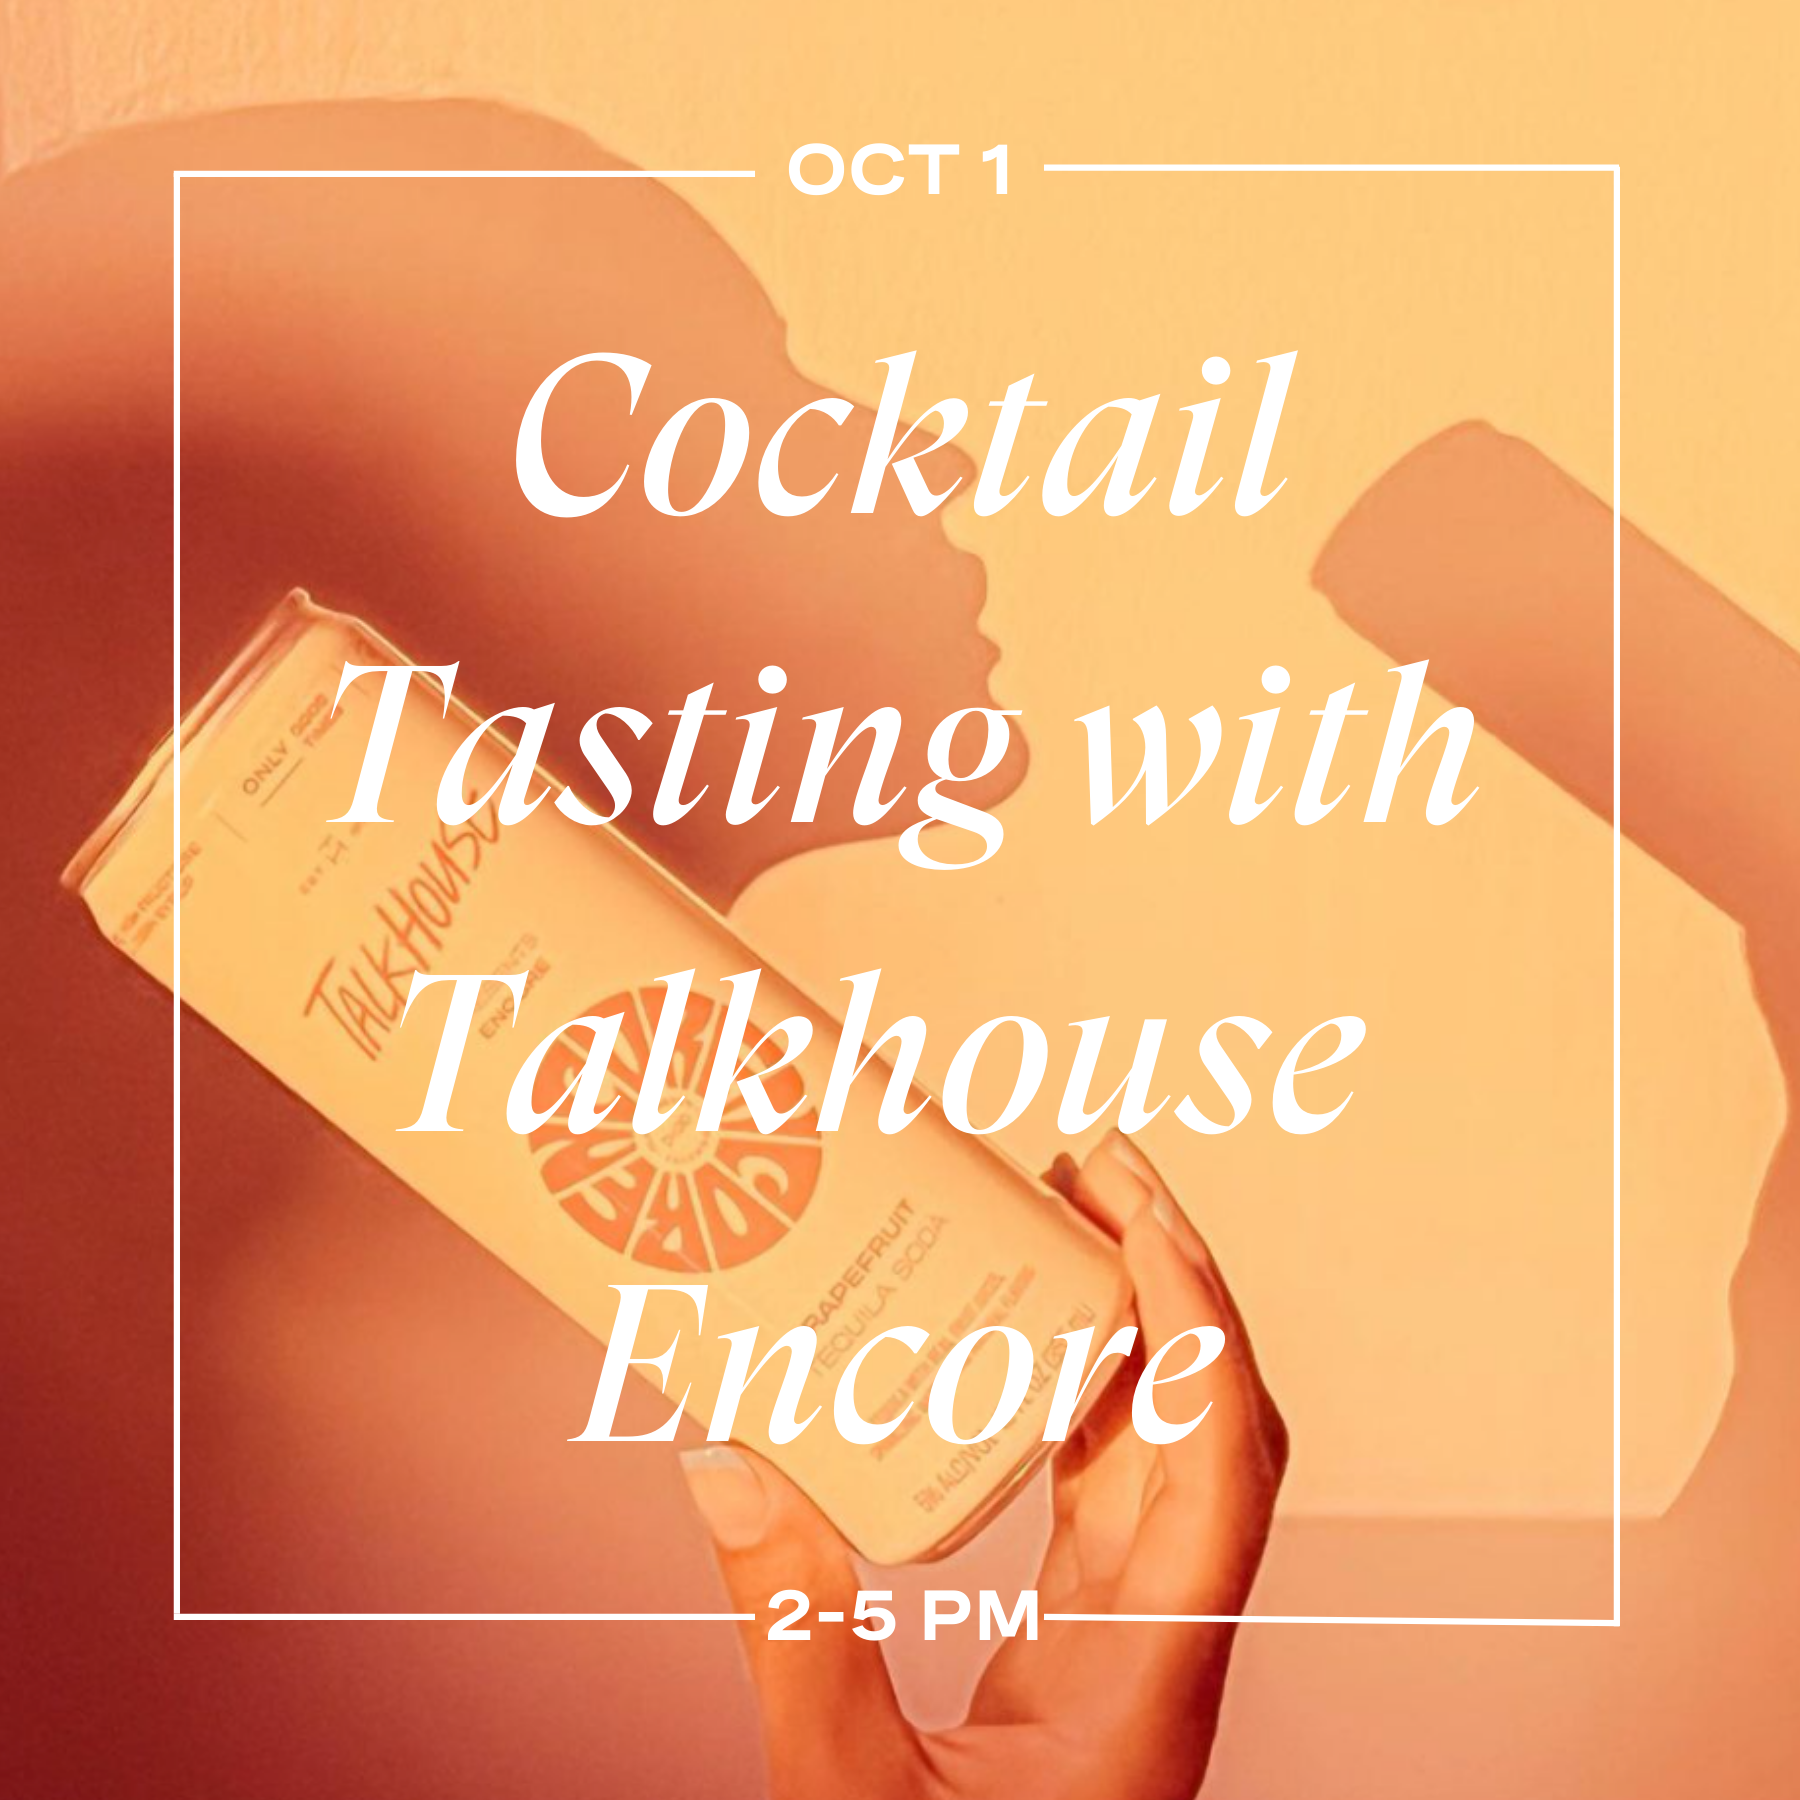 Canned Cocktail Tasting with Talkhouse Encore